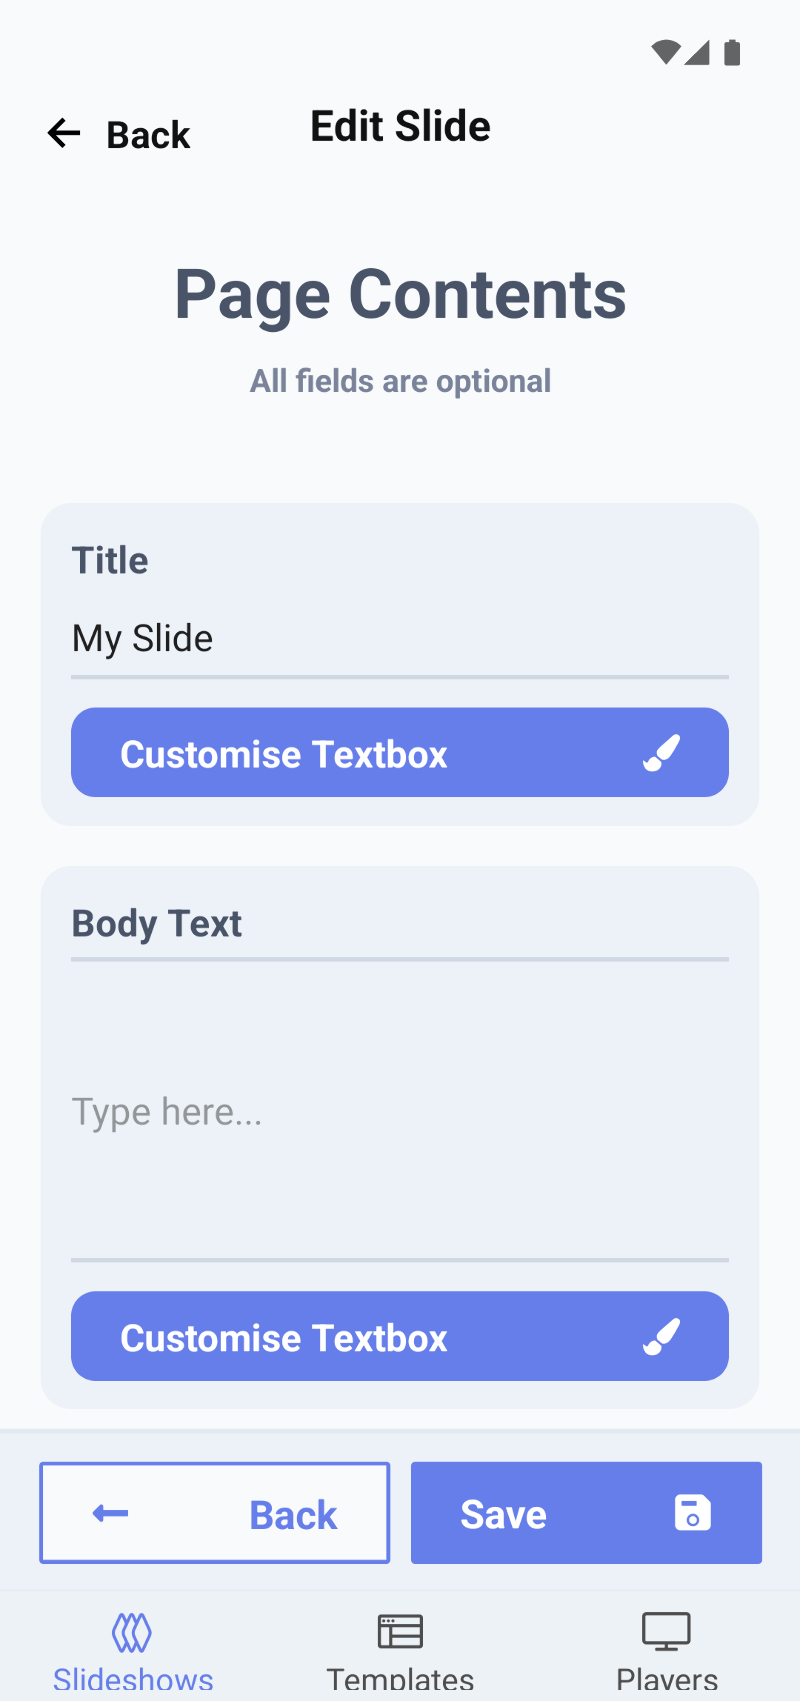 Application screenshot showing text inputs with buttons for customising text formatting